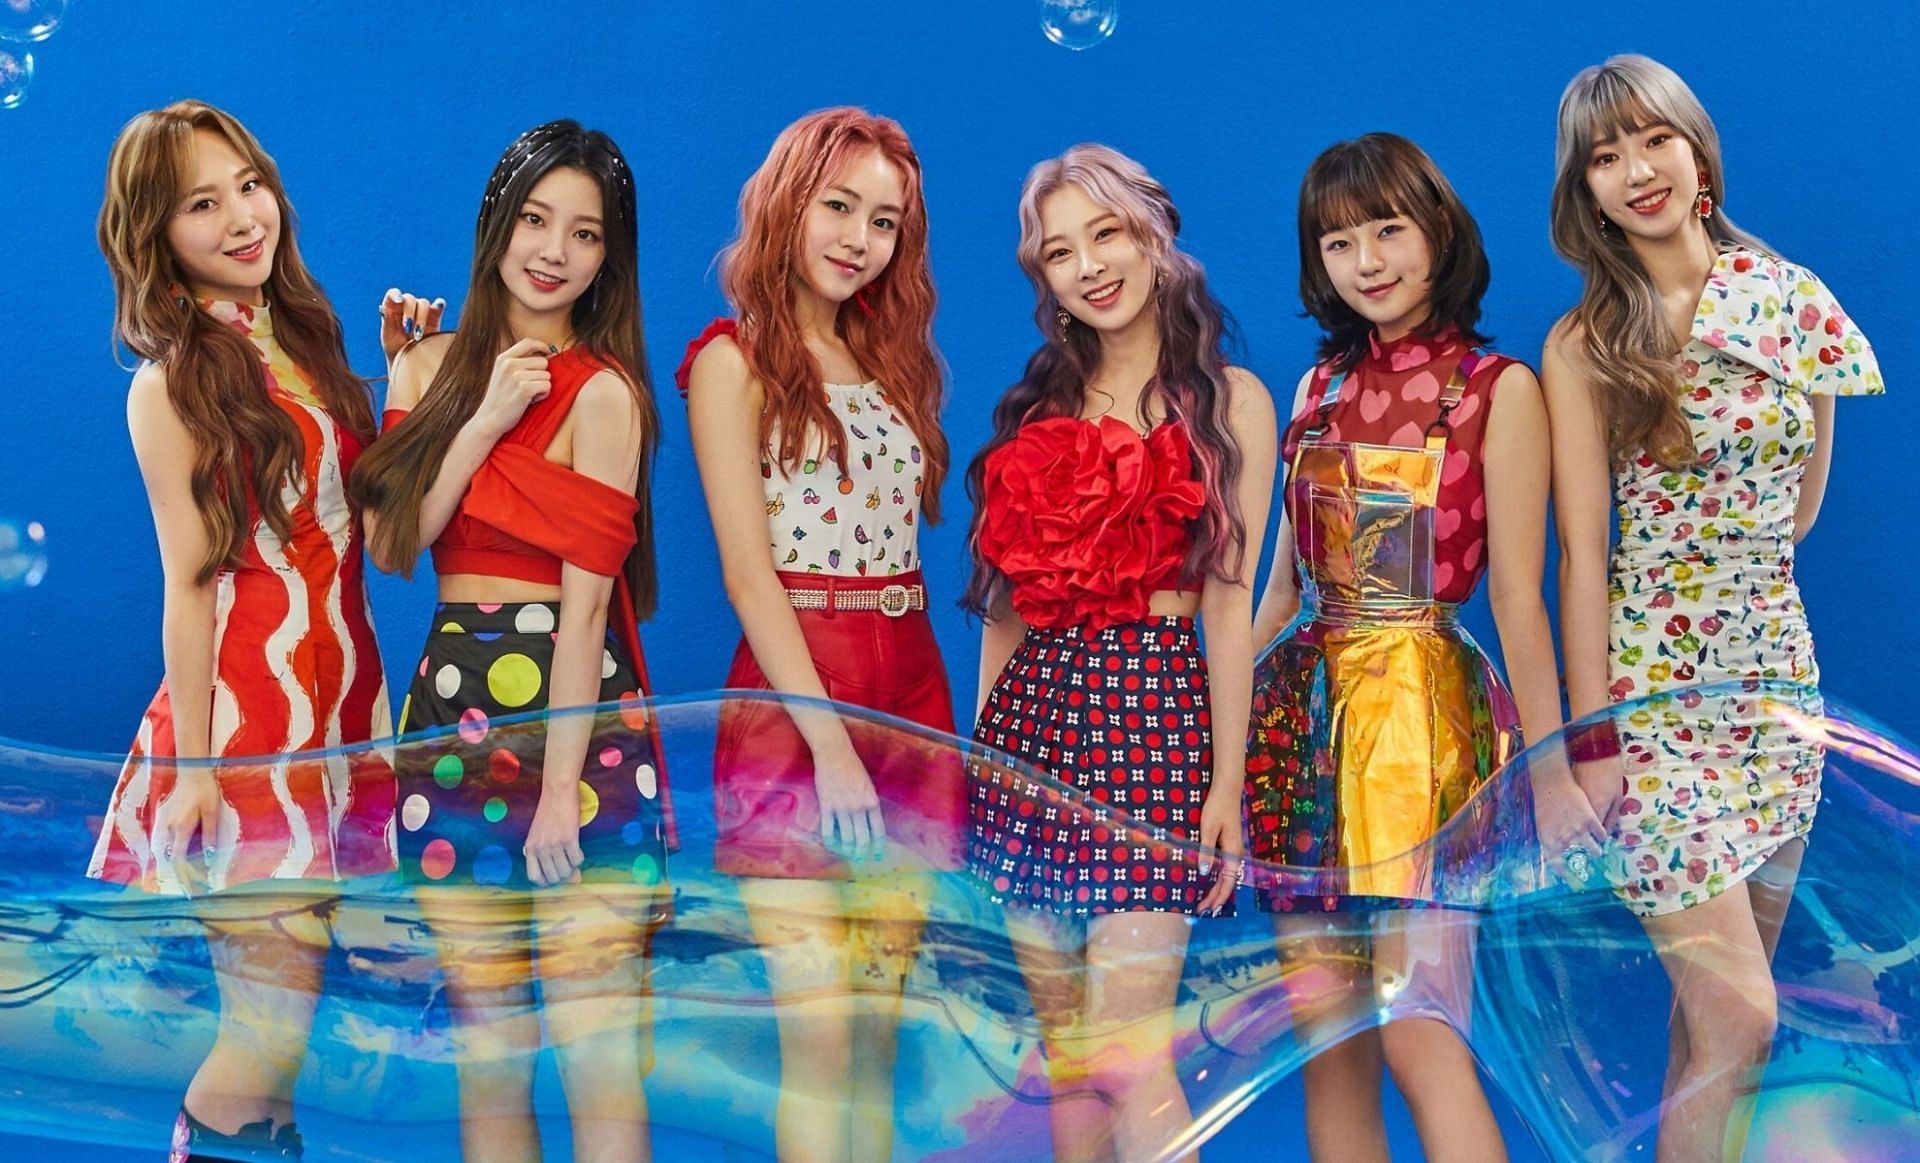 Girl group Rocket Punch &#039;Blue Punch&#039; concept photo (Image via @woollim_ent/Twitter)